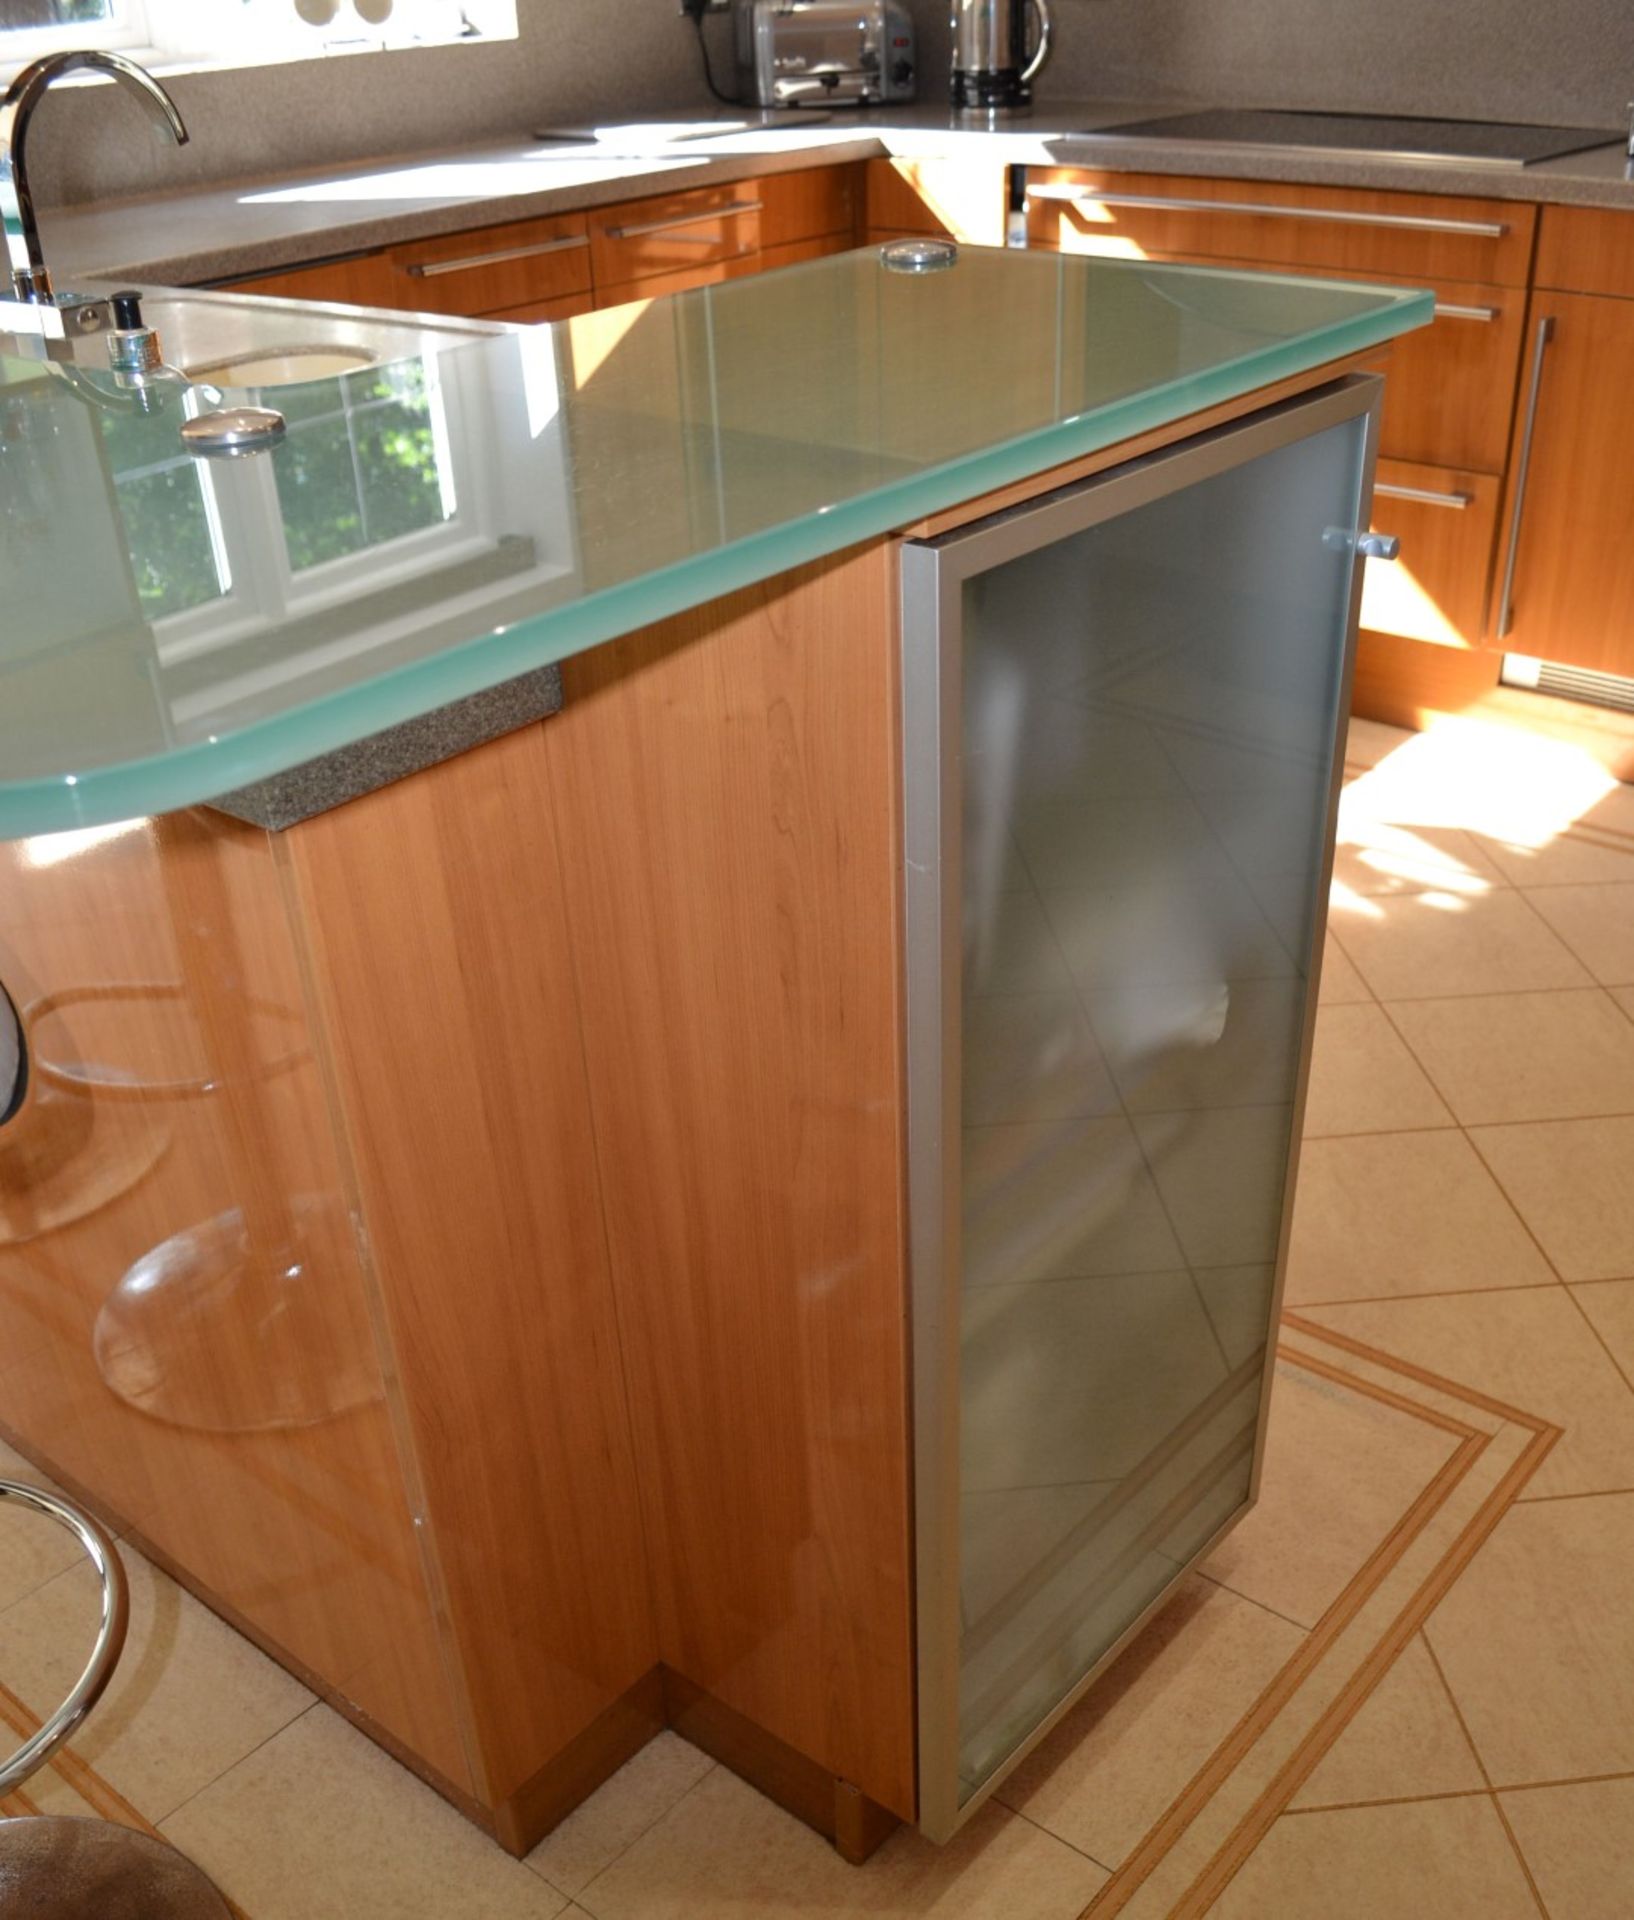 1 x Bespoke Siematic Gloss Fitted Kitchen With Corian Worktops, Frosted Glass Breakfast Bar - NO VAT - Image 86 of 91